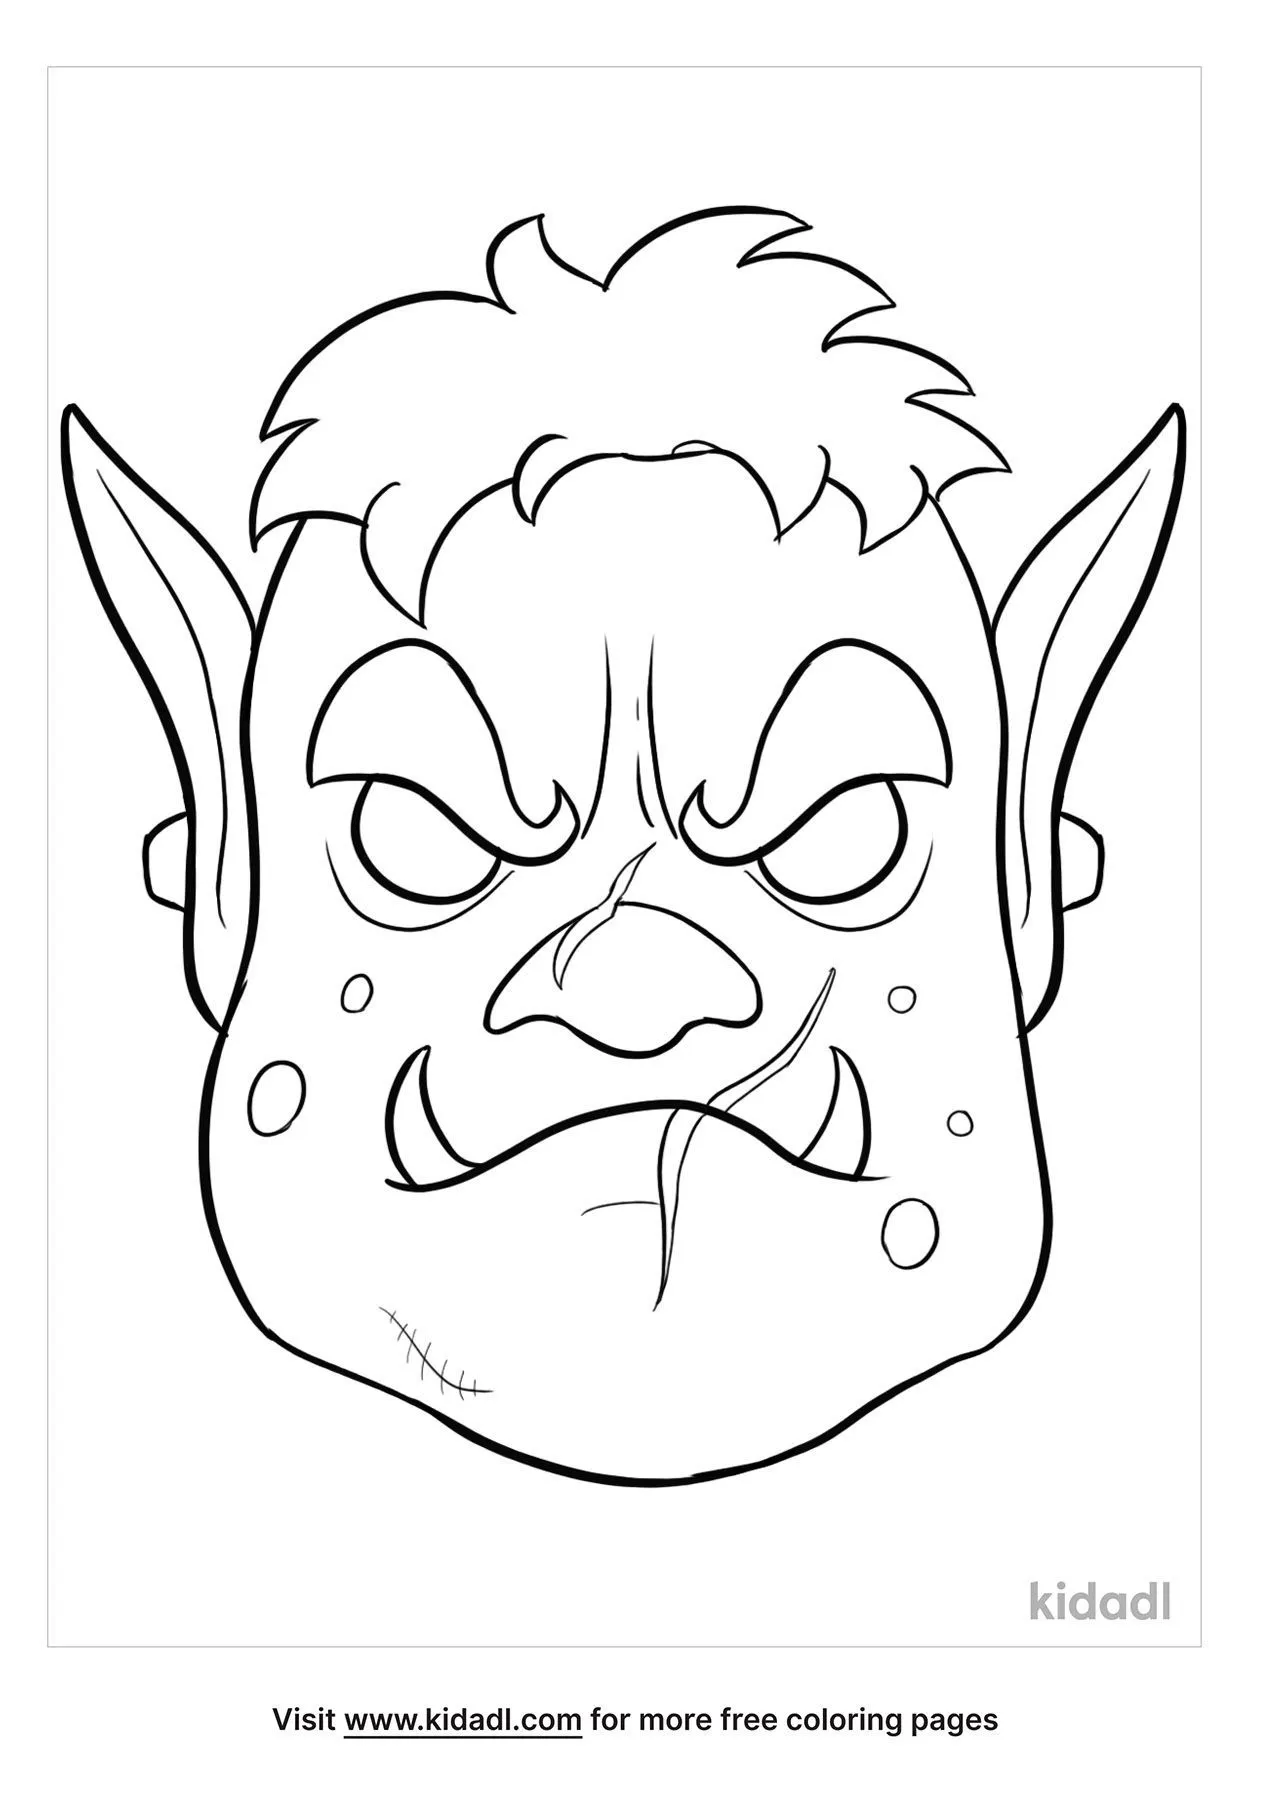 troll face coloring pages